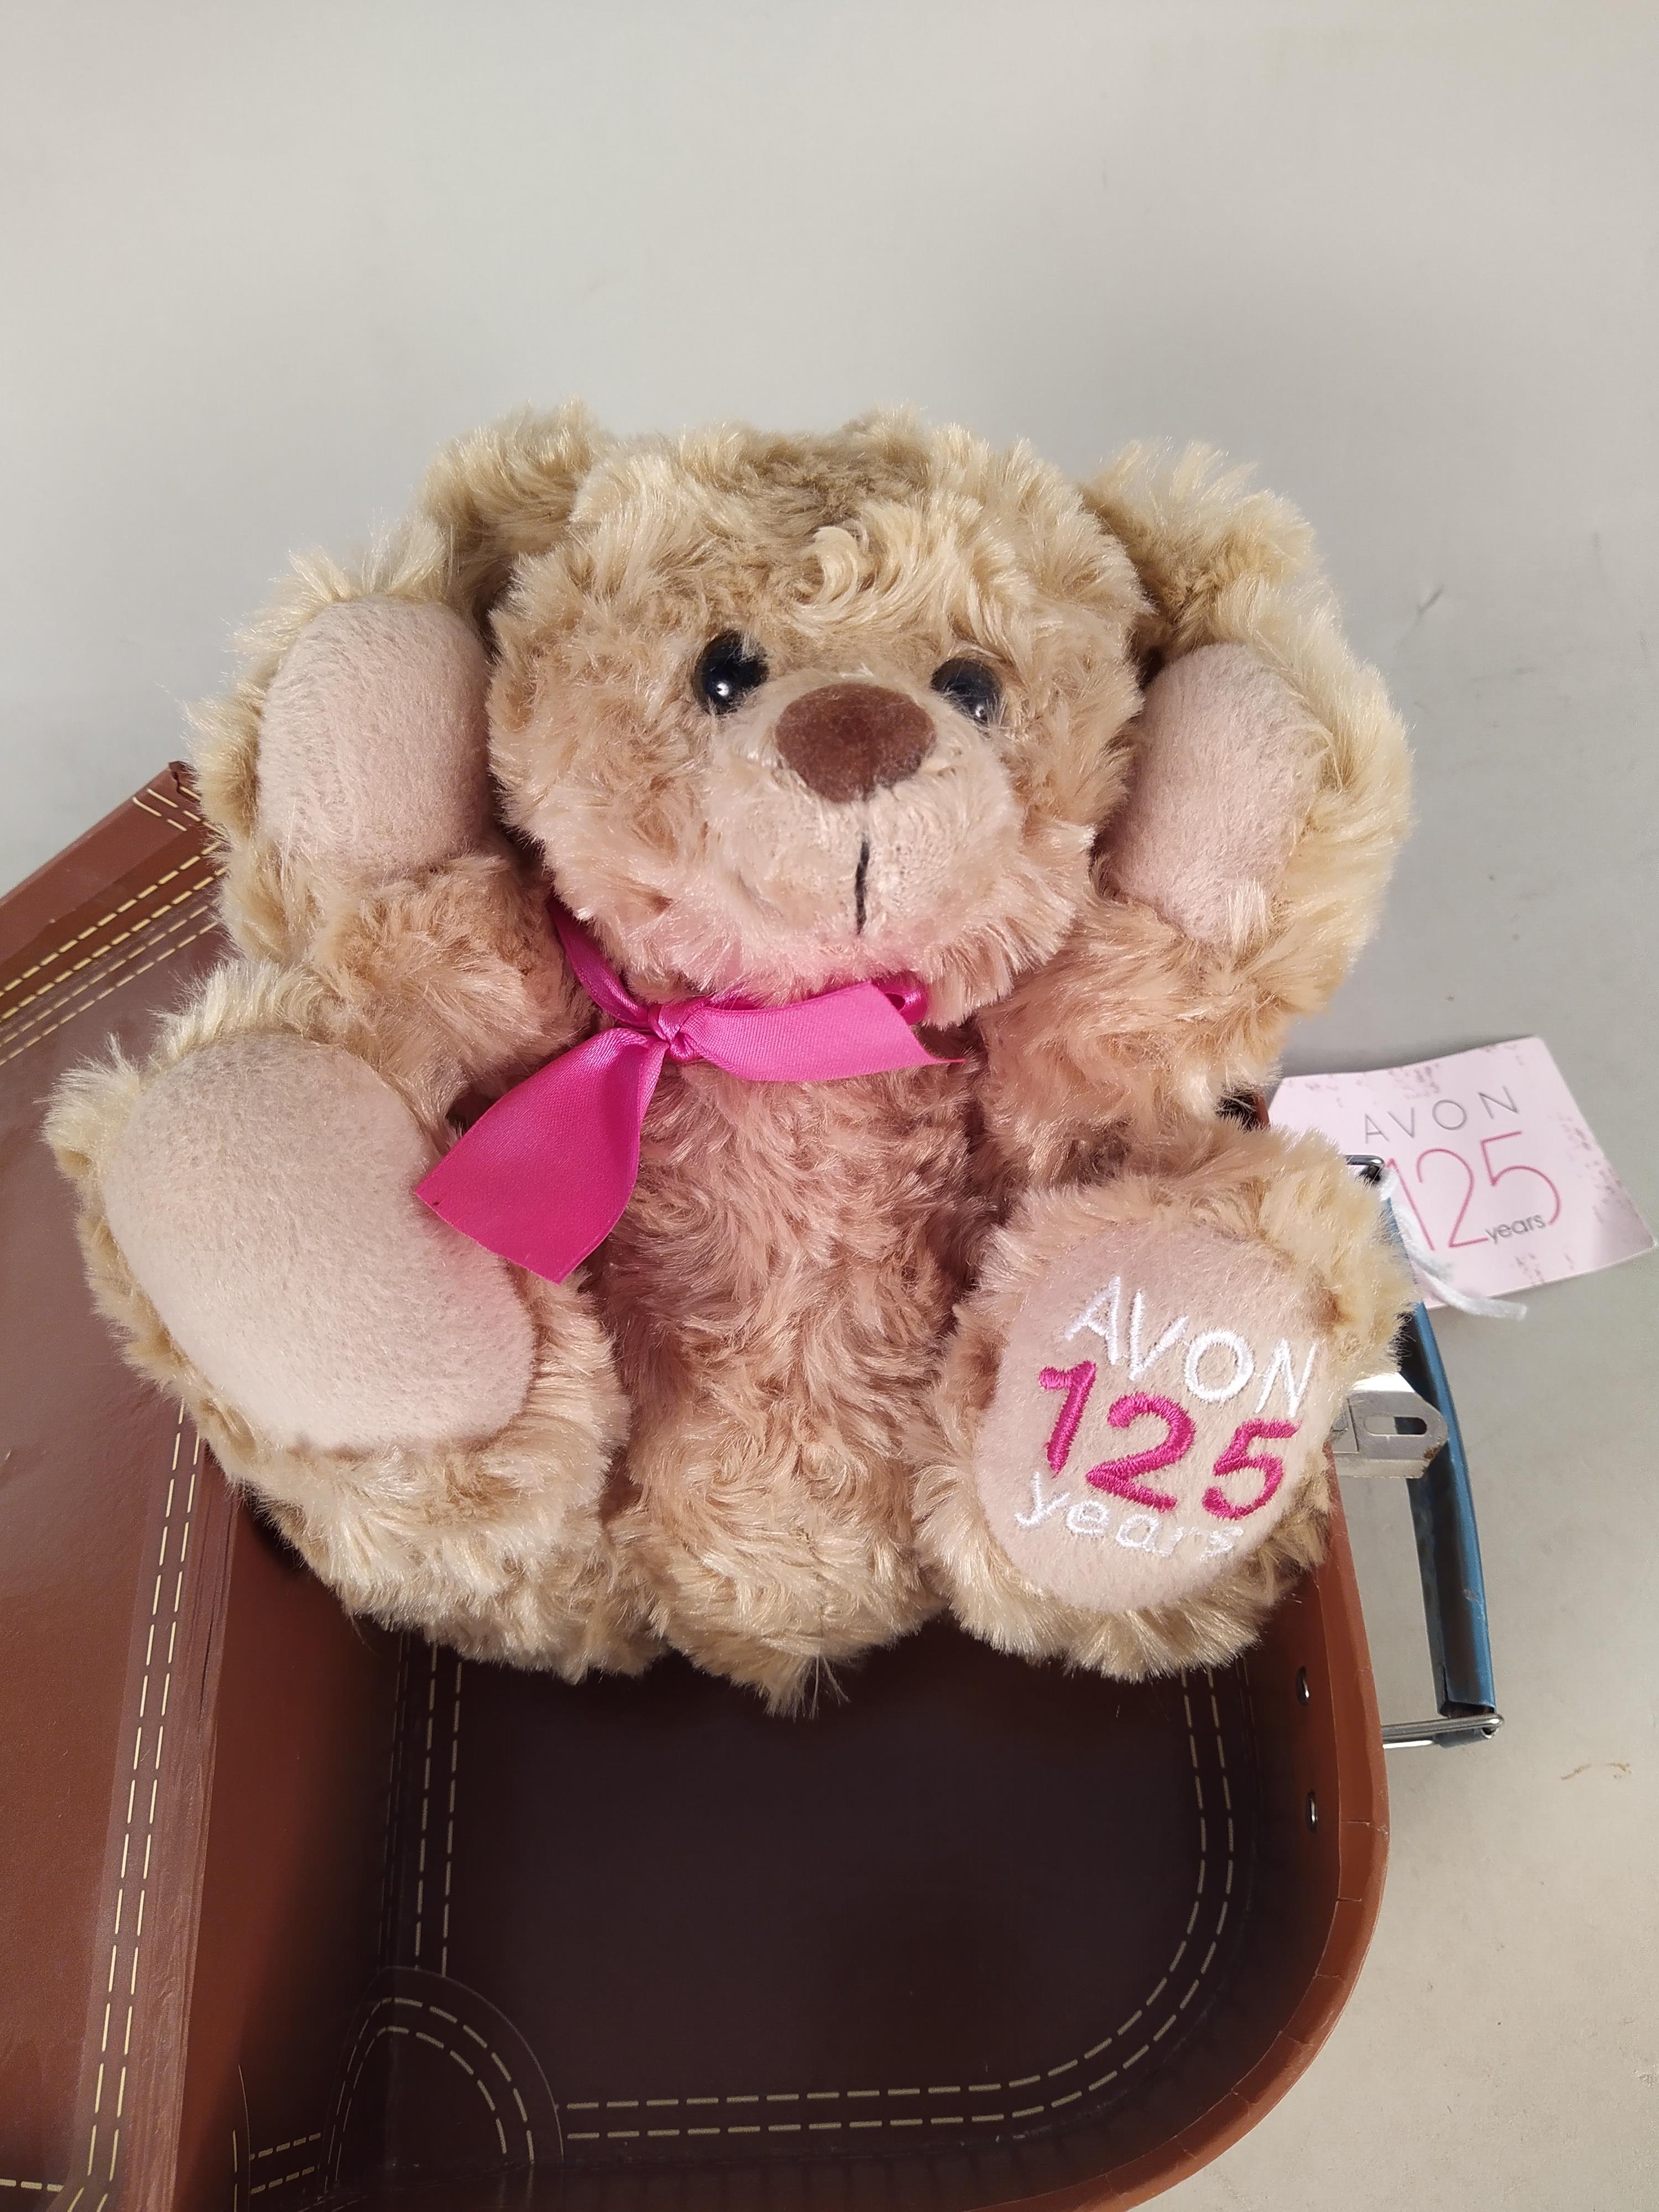 A cased Avon Teddy bear celebrating 125 years, - Image 2 of 3